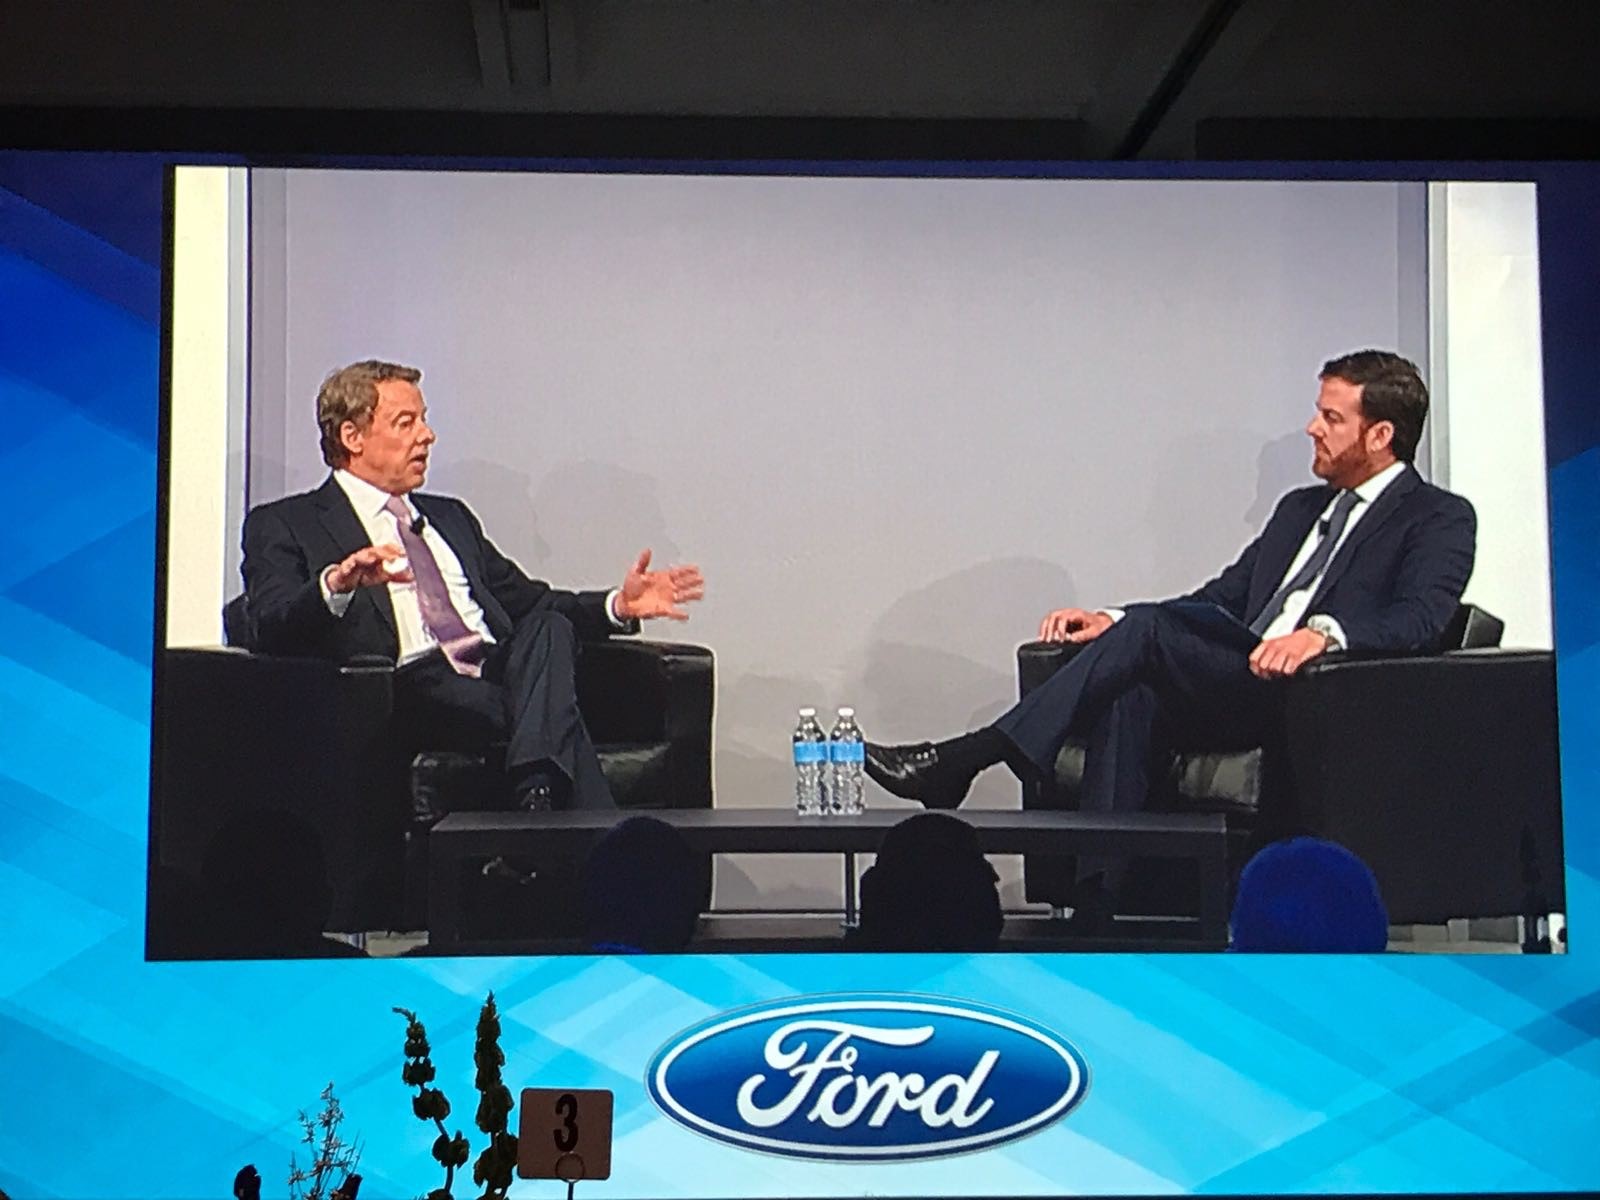 Autonews Dinner in Detroit. William Clay Ford Jr., Executive Chairman of Ford and KC Crain, Executive Vice President of Ford Motor Company holding a fireside chat. 